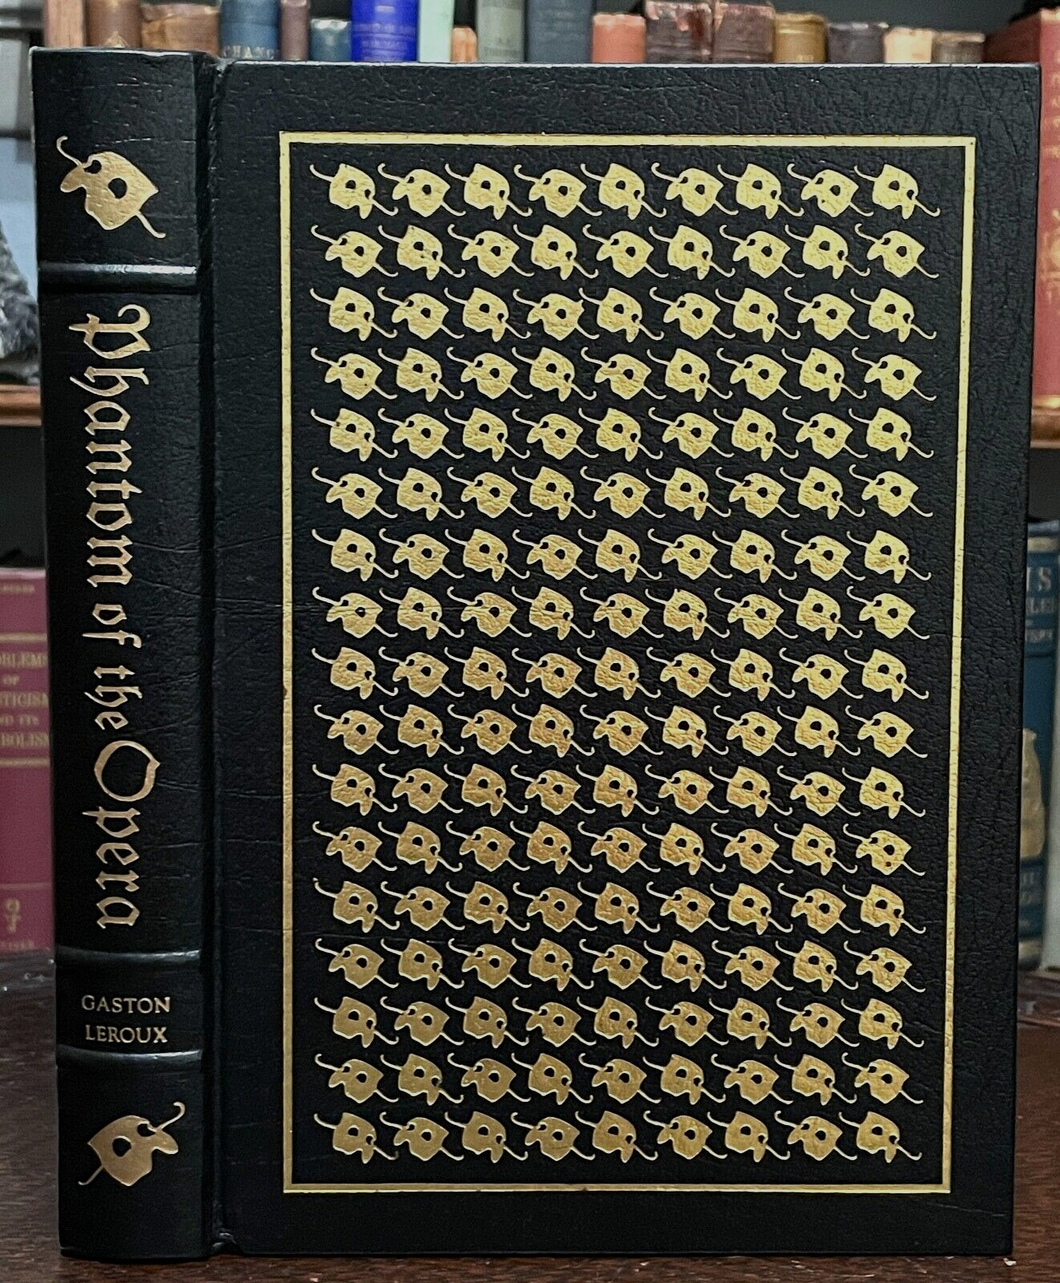 PHANTOM OF THE OPERA - Easton Press, 1990 - Collector's Edition, Full Leather